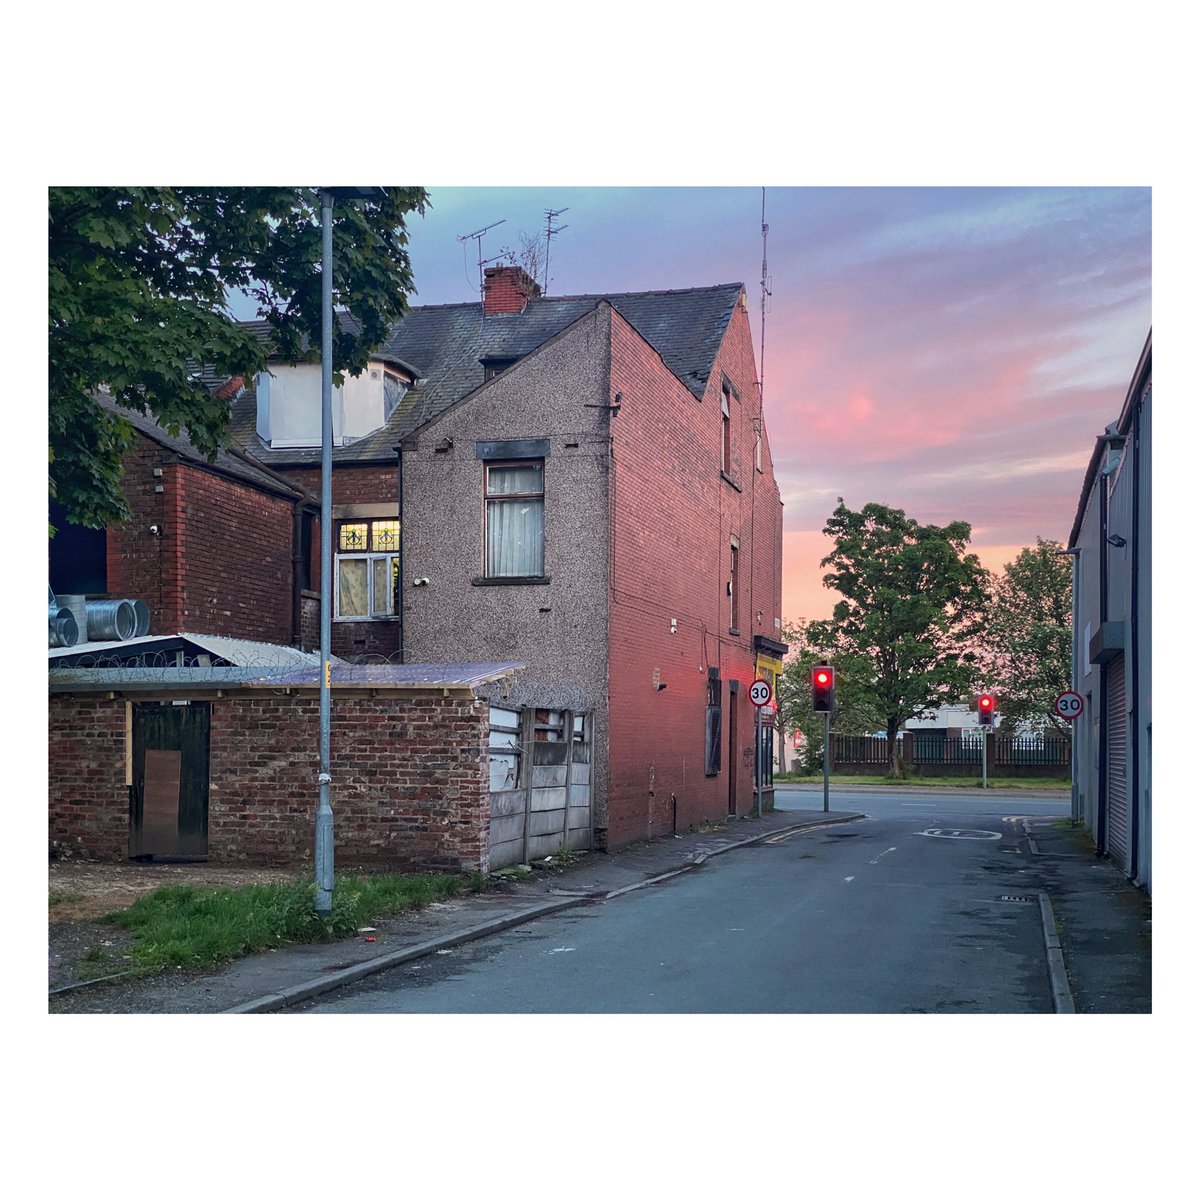 From a walk yesterday evening up Ashton Old Rd #iPhone #Manchester